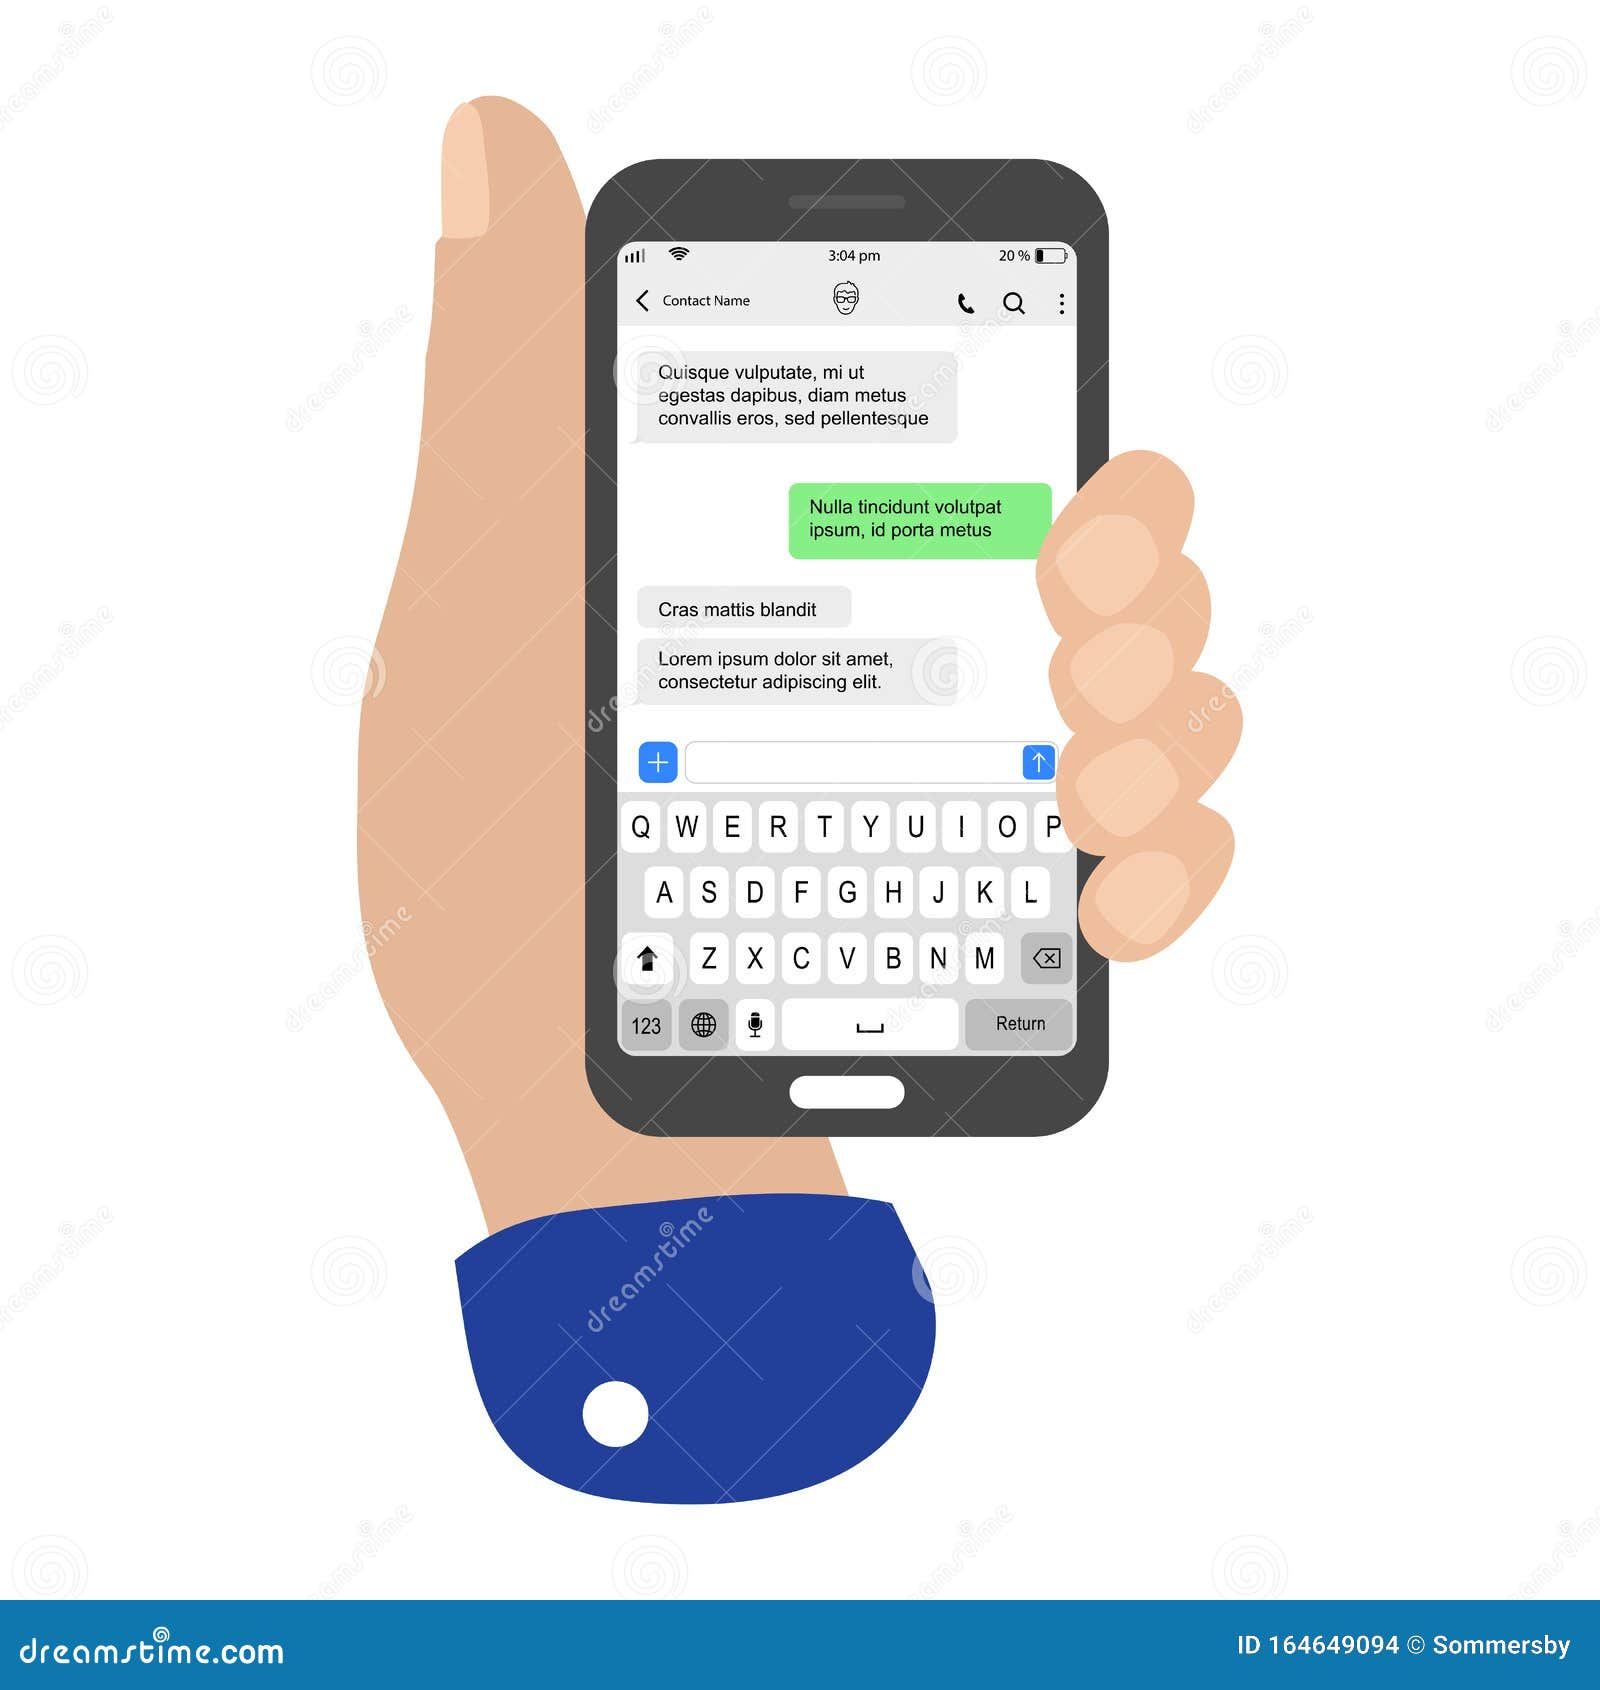 Sms chat app